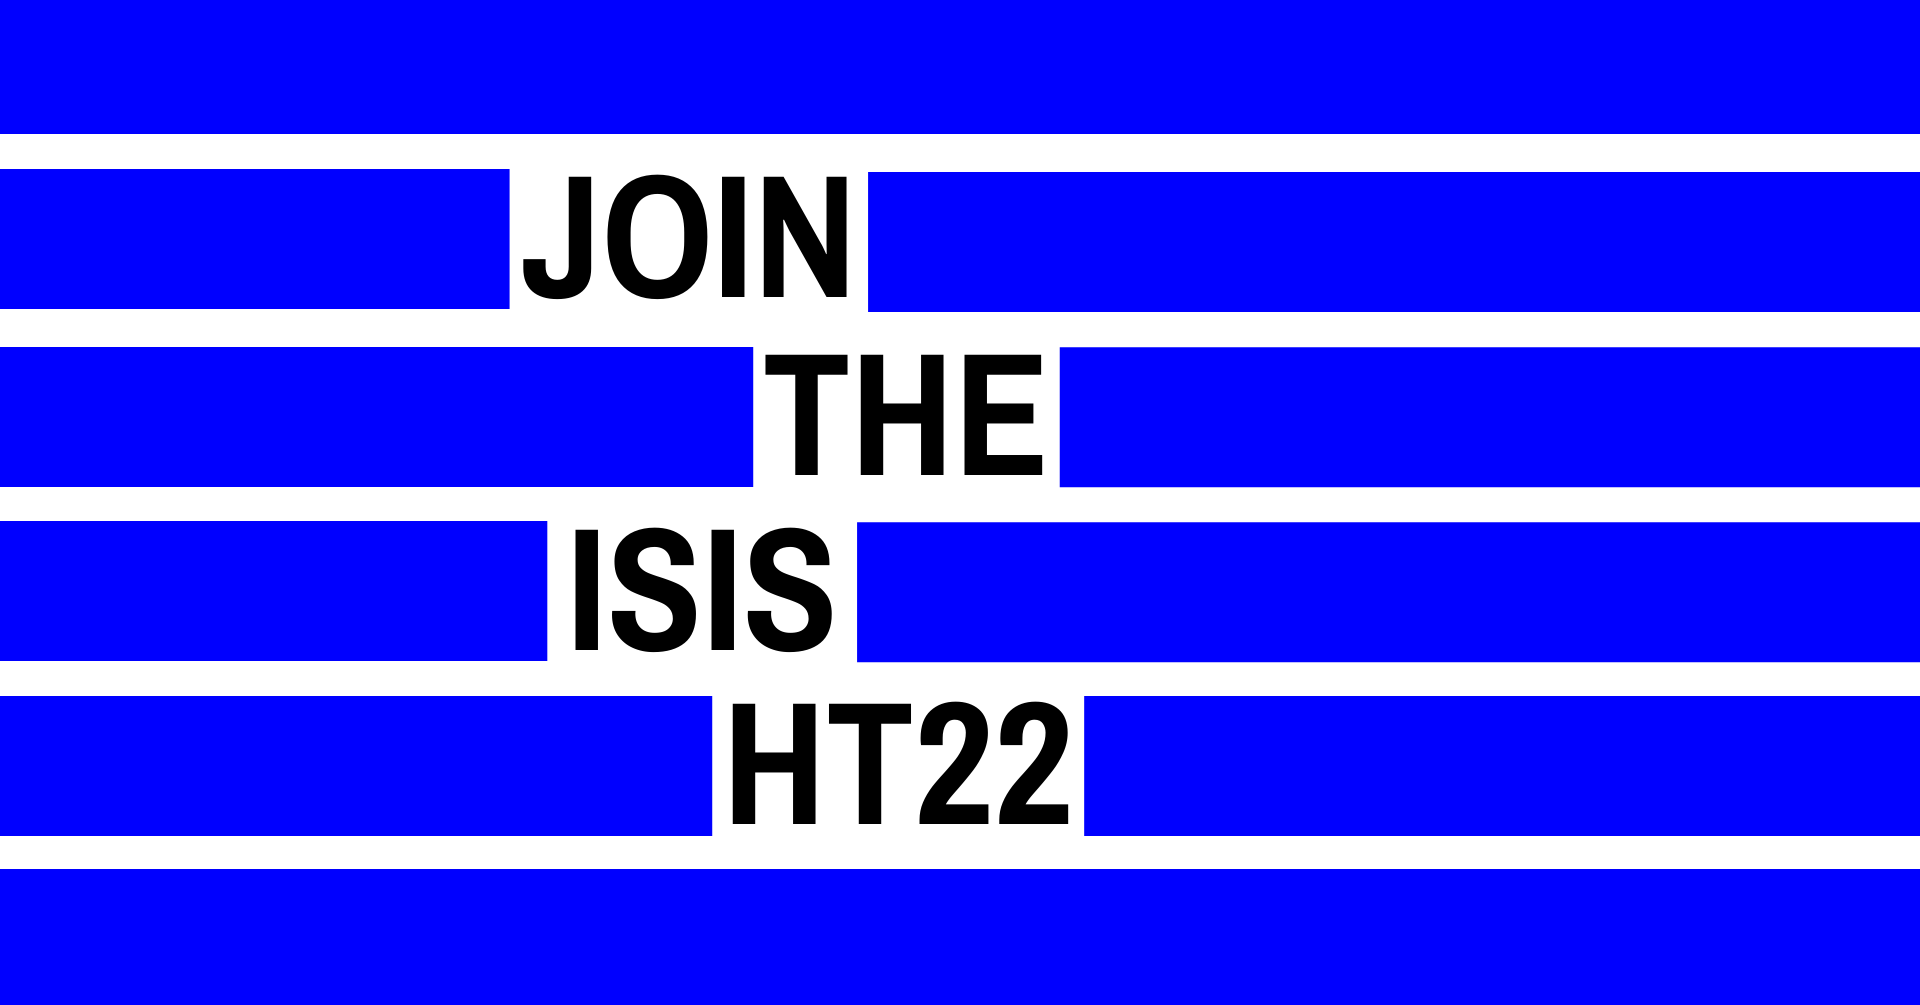 Blue lines one a white background. The text: "Join The Isis HT22"